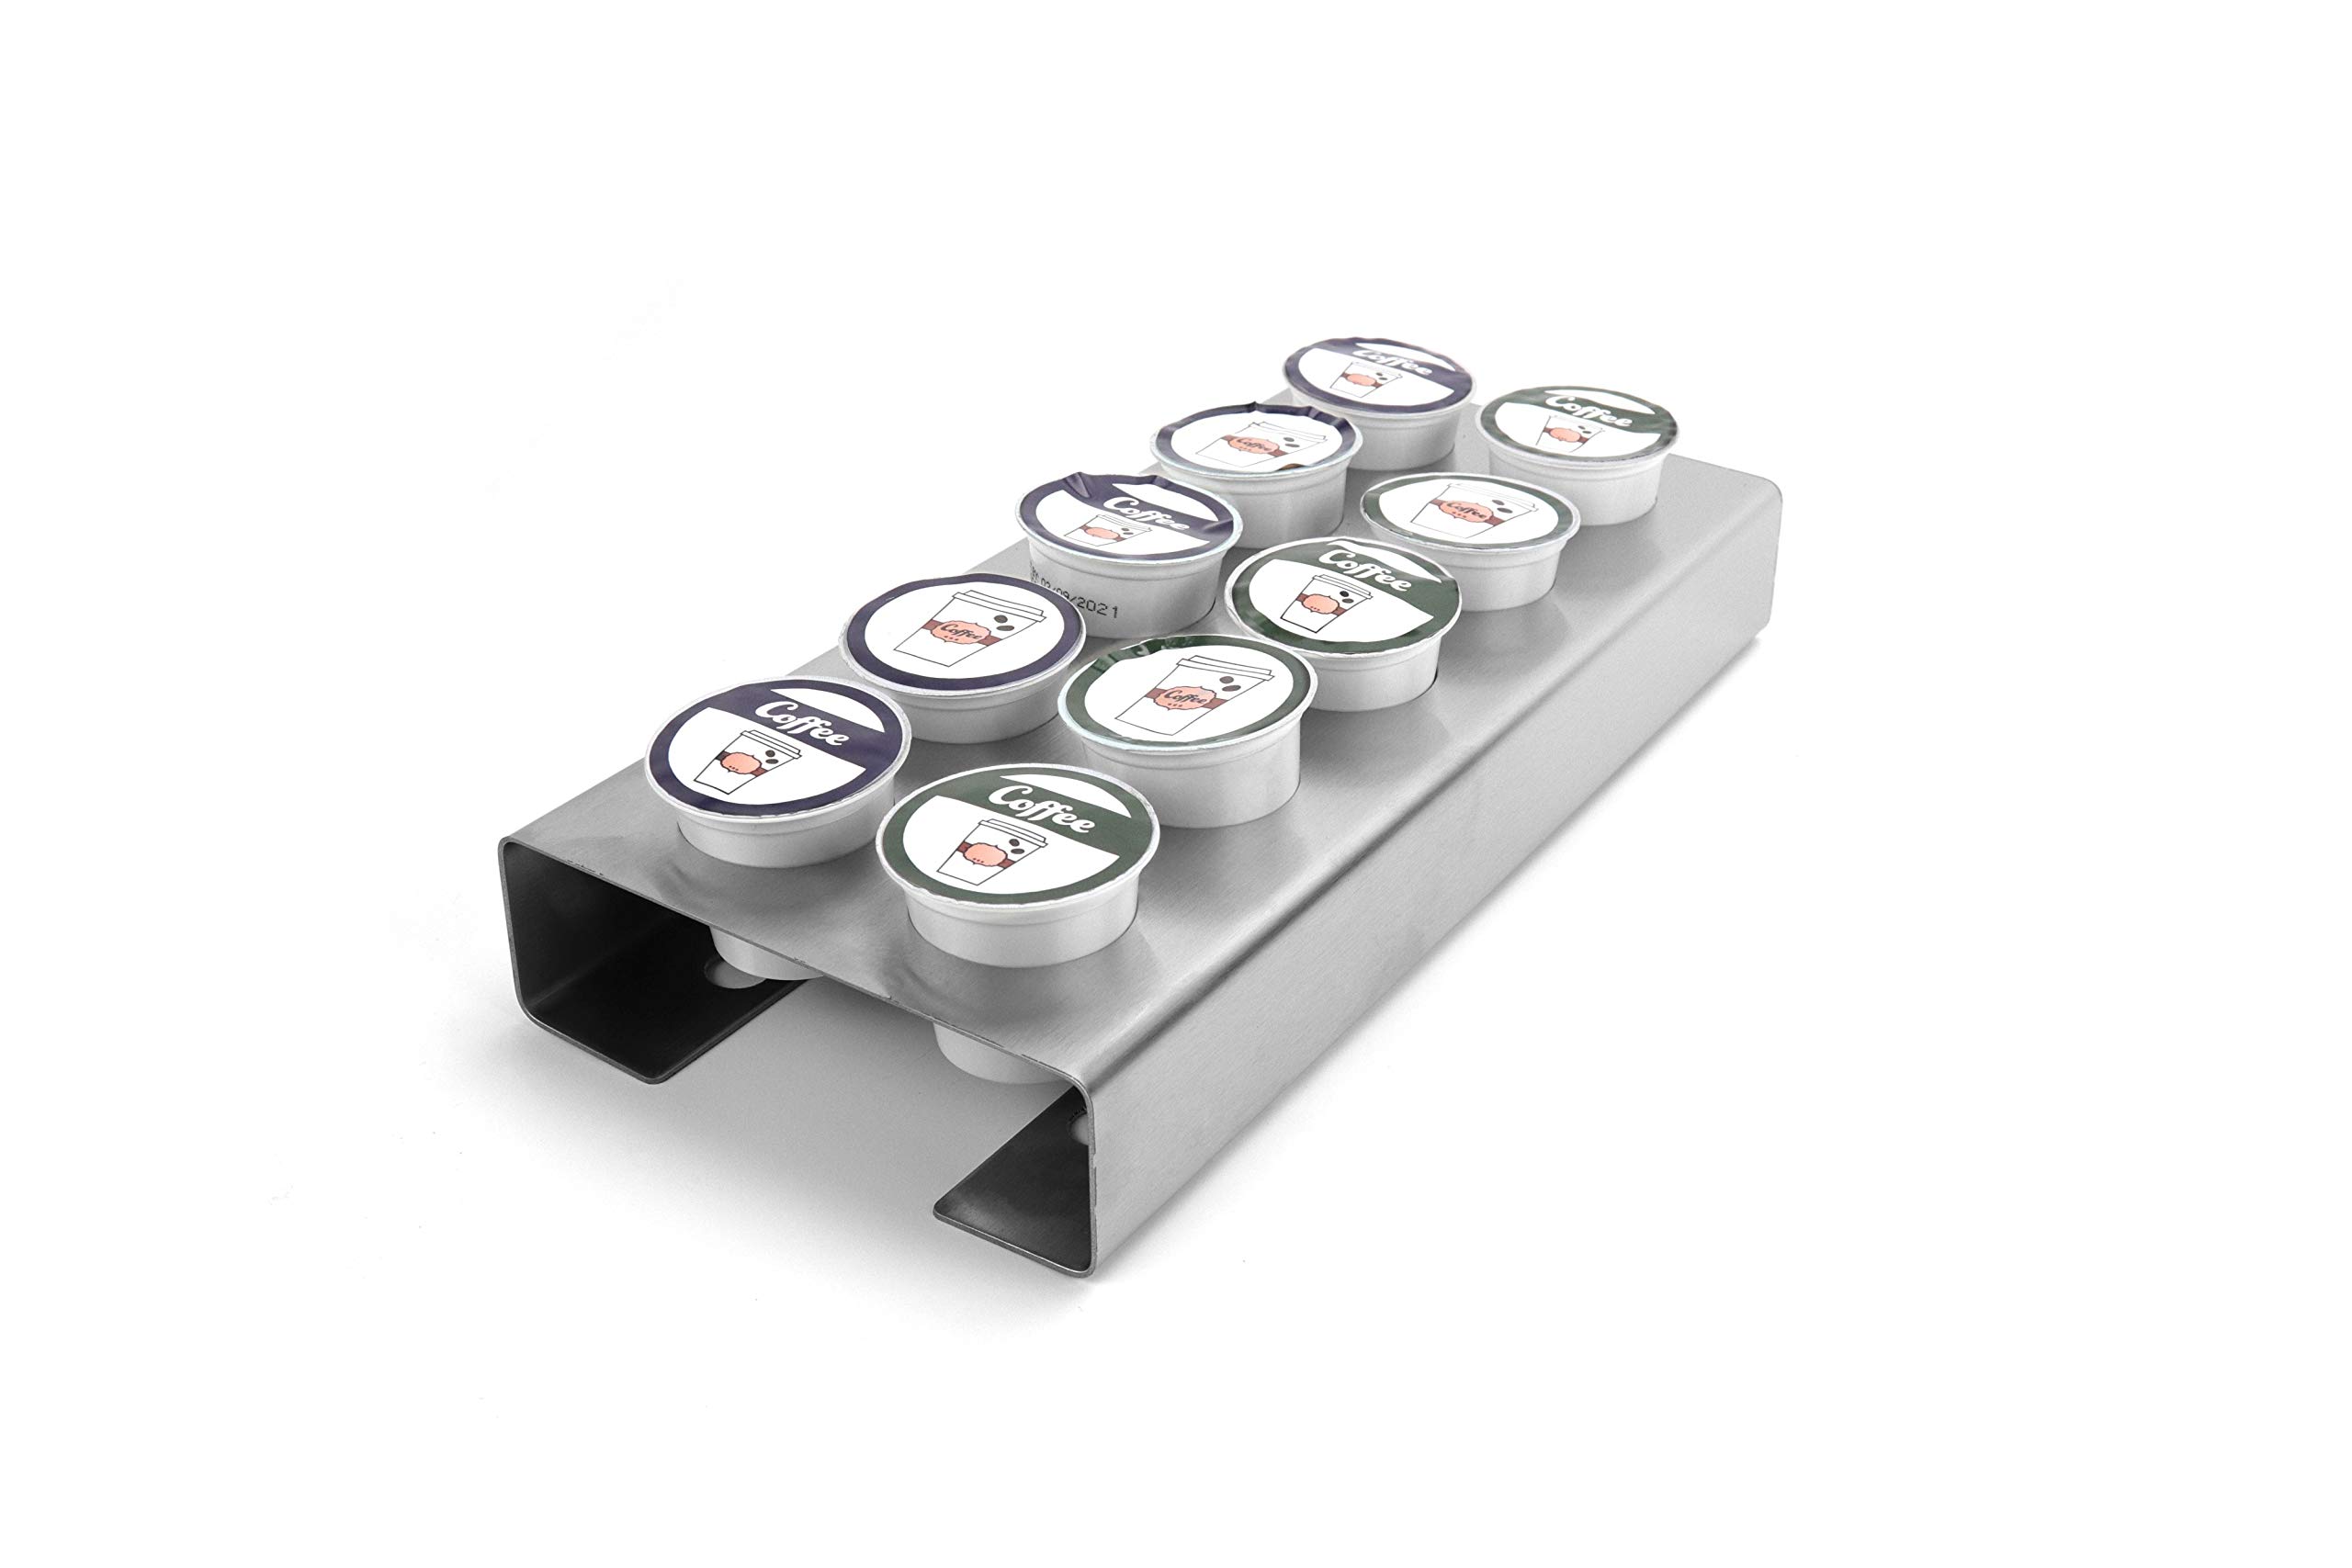 Polar Whale 2 Brushed Stainless Steel Coffee Pod Organizer Storage Tray Counter Stand or Wall Mount Compatible with Keurig K-Cup KCup for Kitchen Home Office Waterproof 12 x 5.25 Inches Each Holds 10